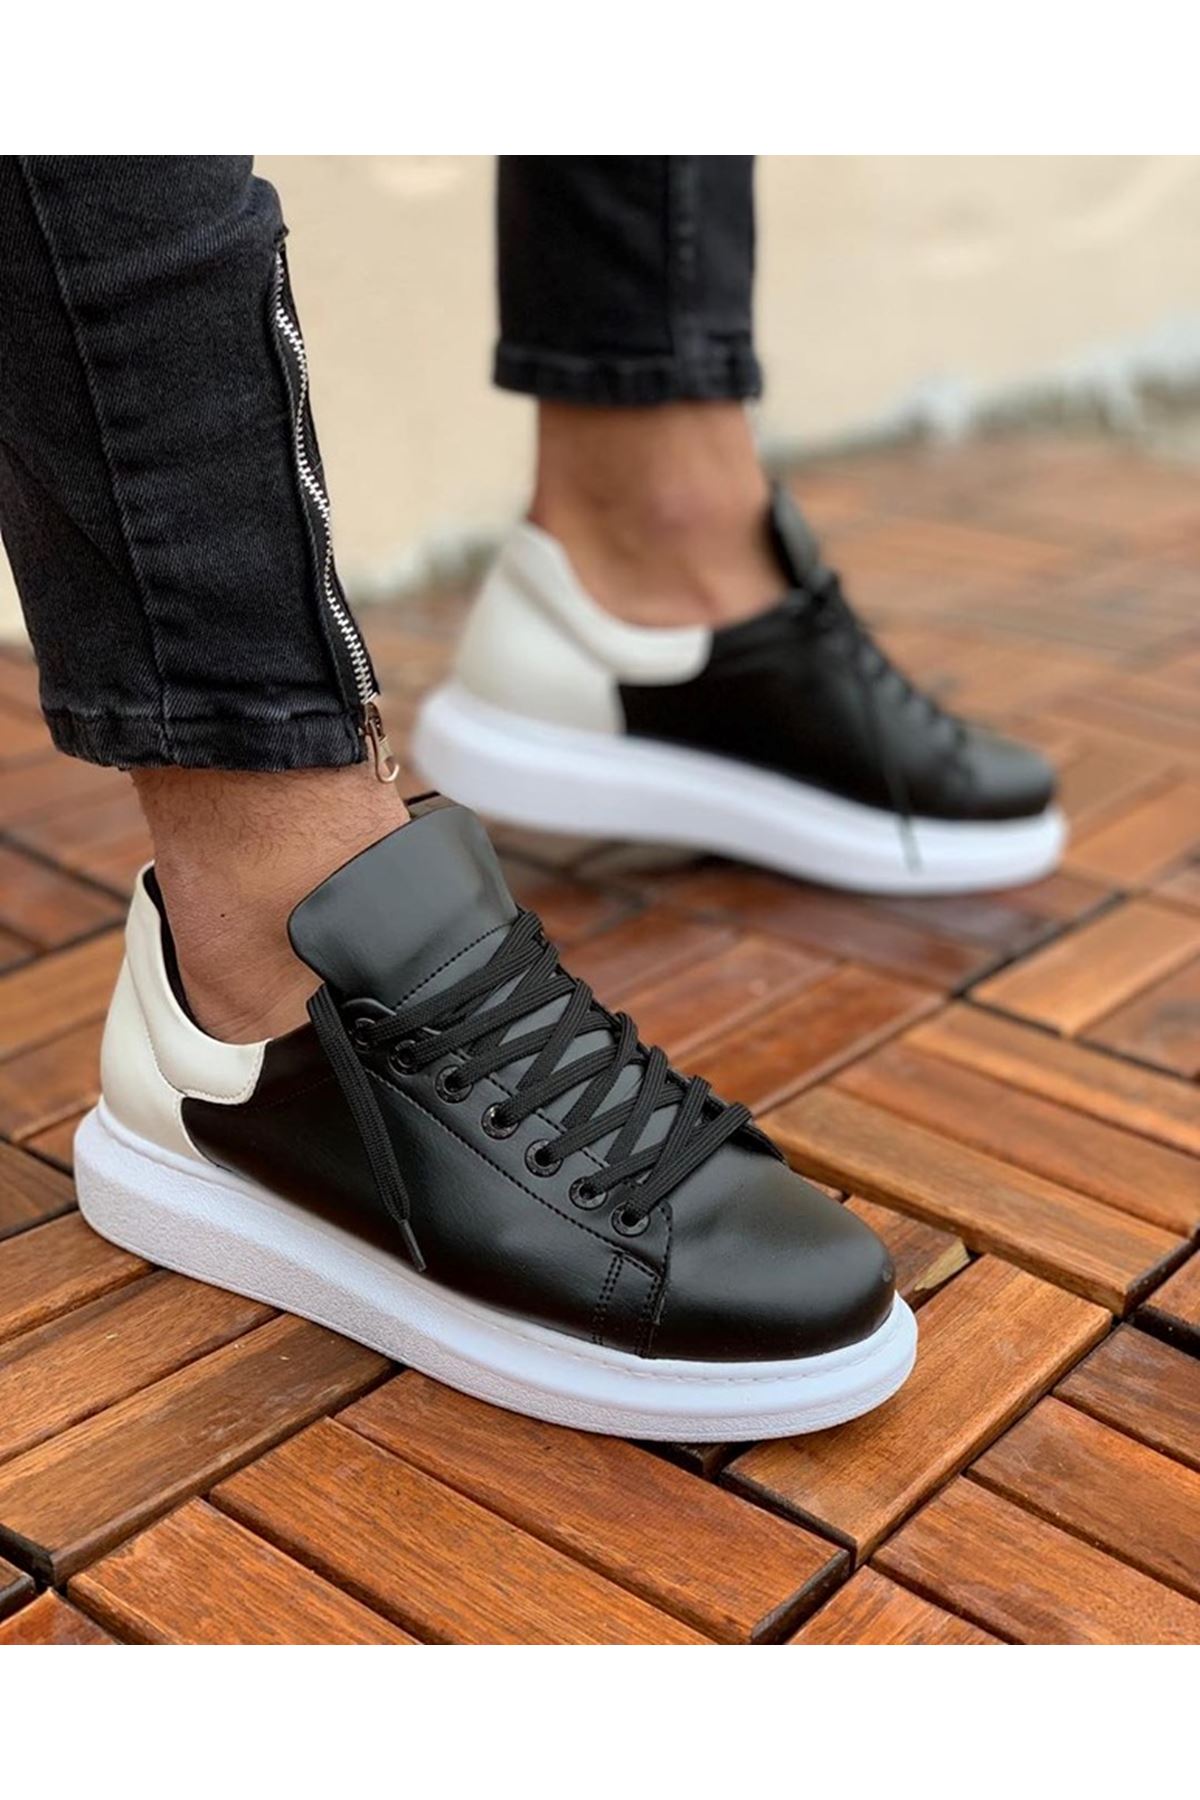 Chekich Men's & Women's Shoes White and Black Artificial Leather Casual Unisex Sneakers Comfortable 2021 Fashion Wedding Orthopedic Walking Sport Odorless Lightweight Breathable Male Female Lovers Couples Suits CH256